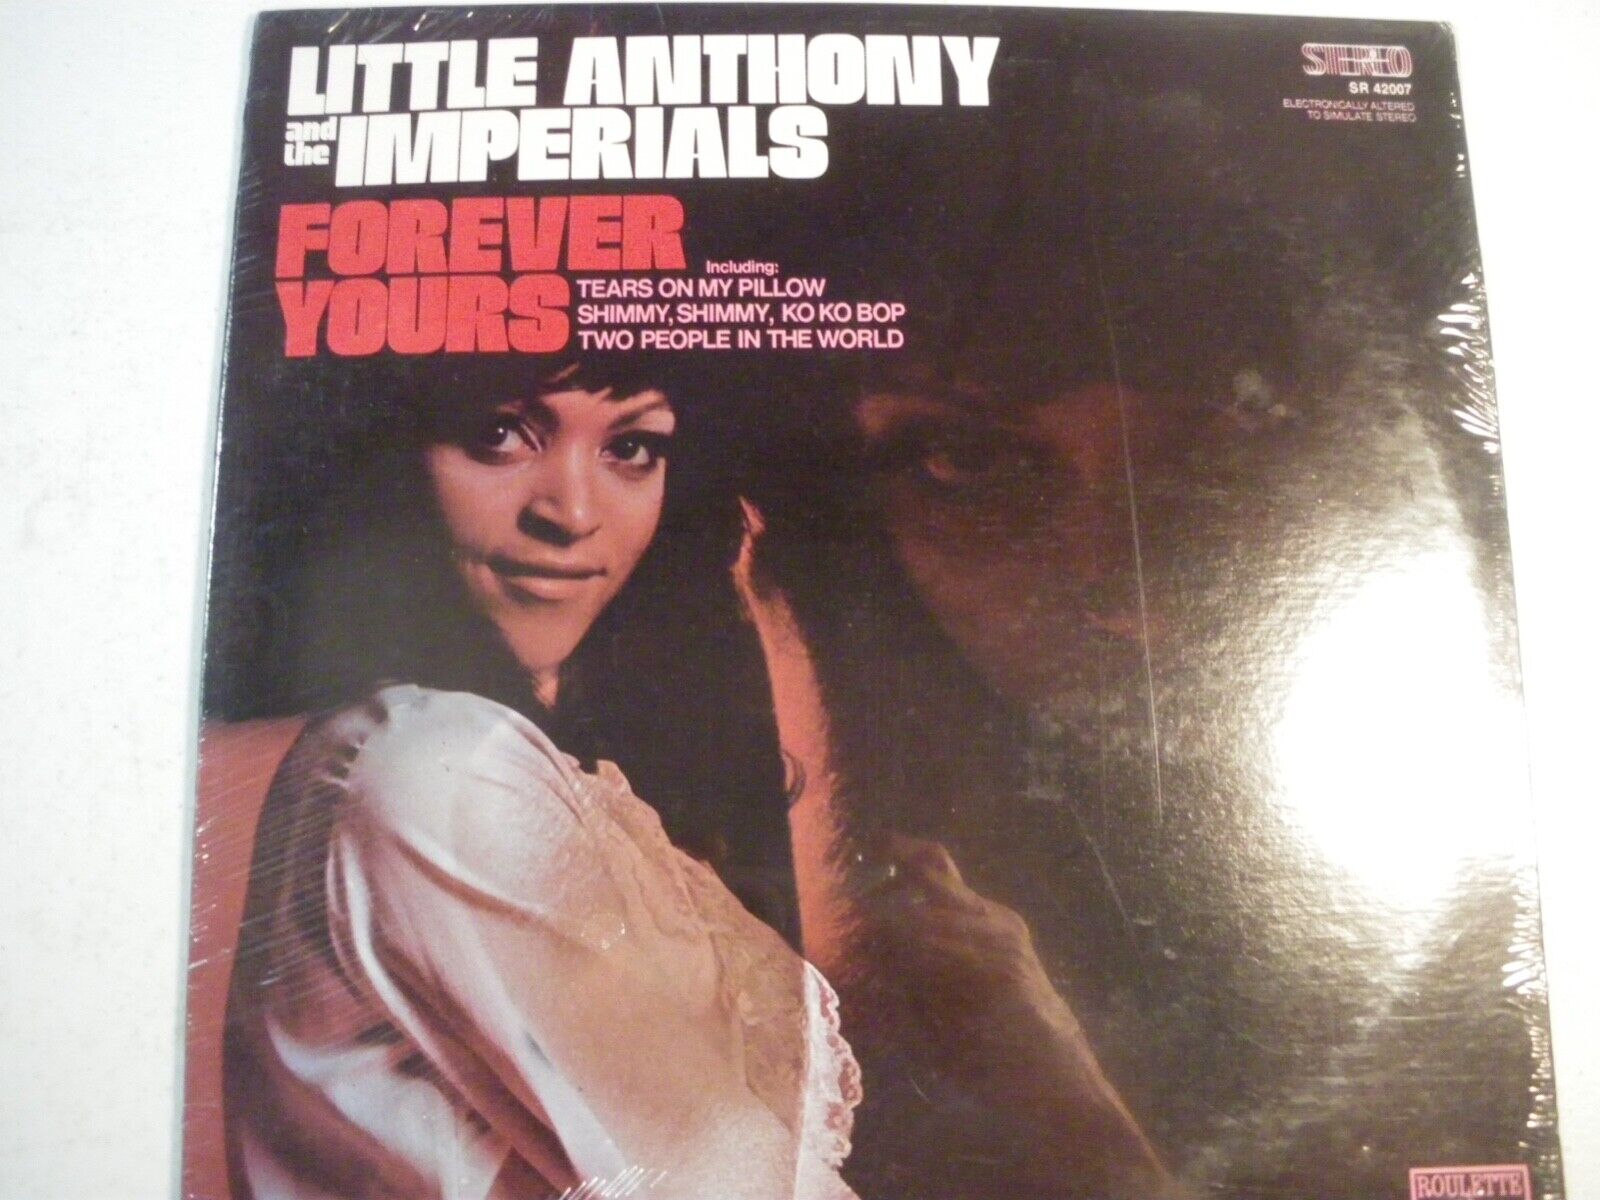 LITTLE ANTHONY & THE IMPERIALS - FOREVER YOURS - SEAKED and NEW LP